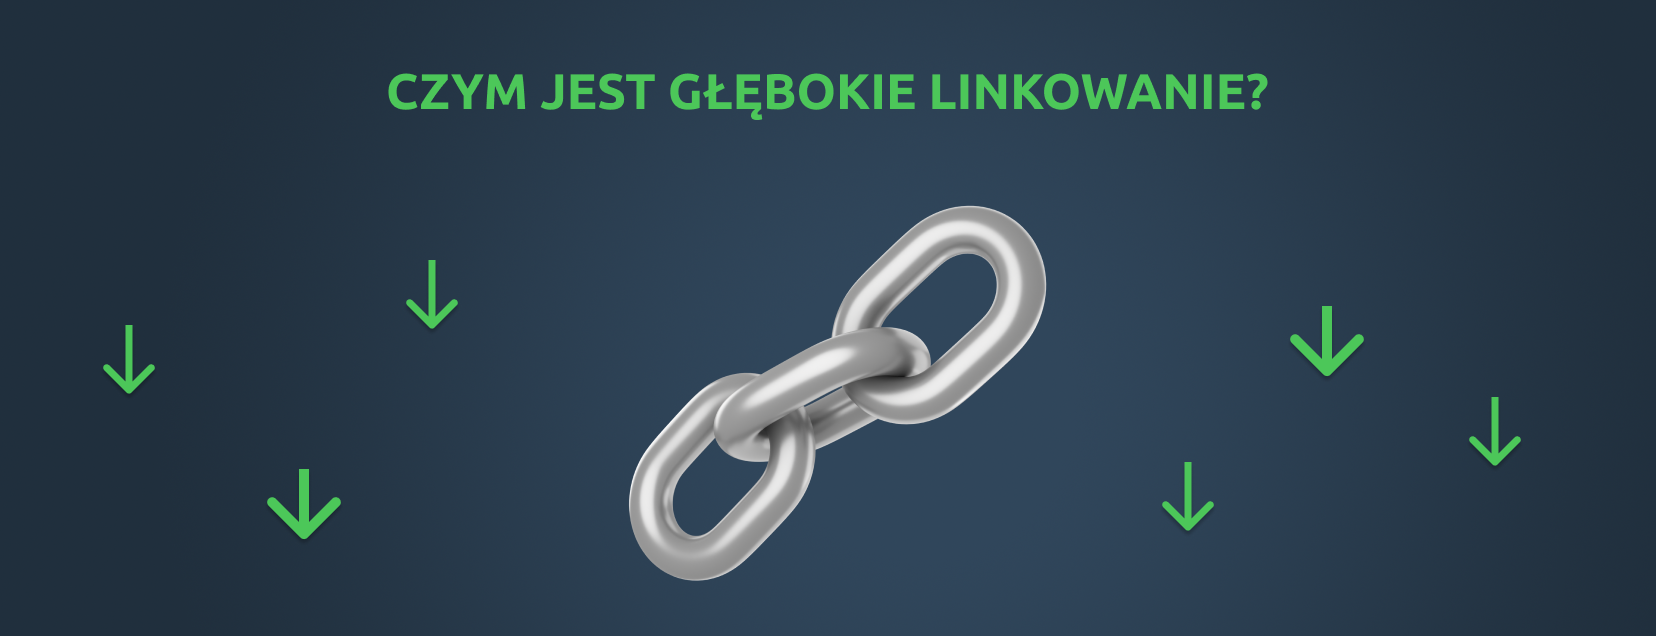 co to jest deep link?